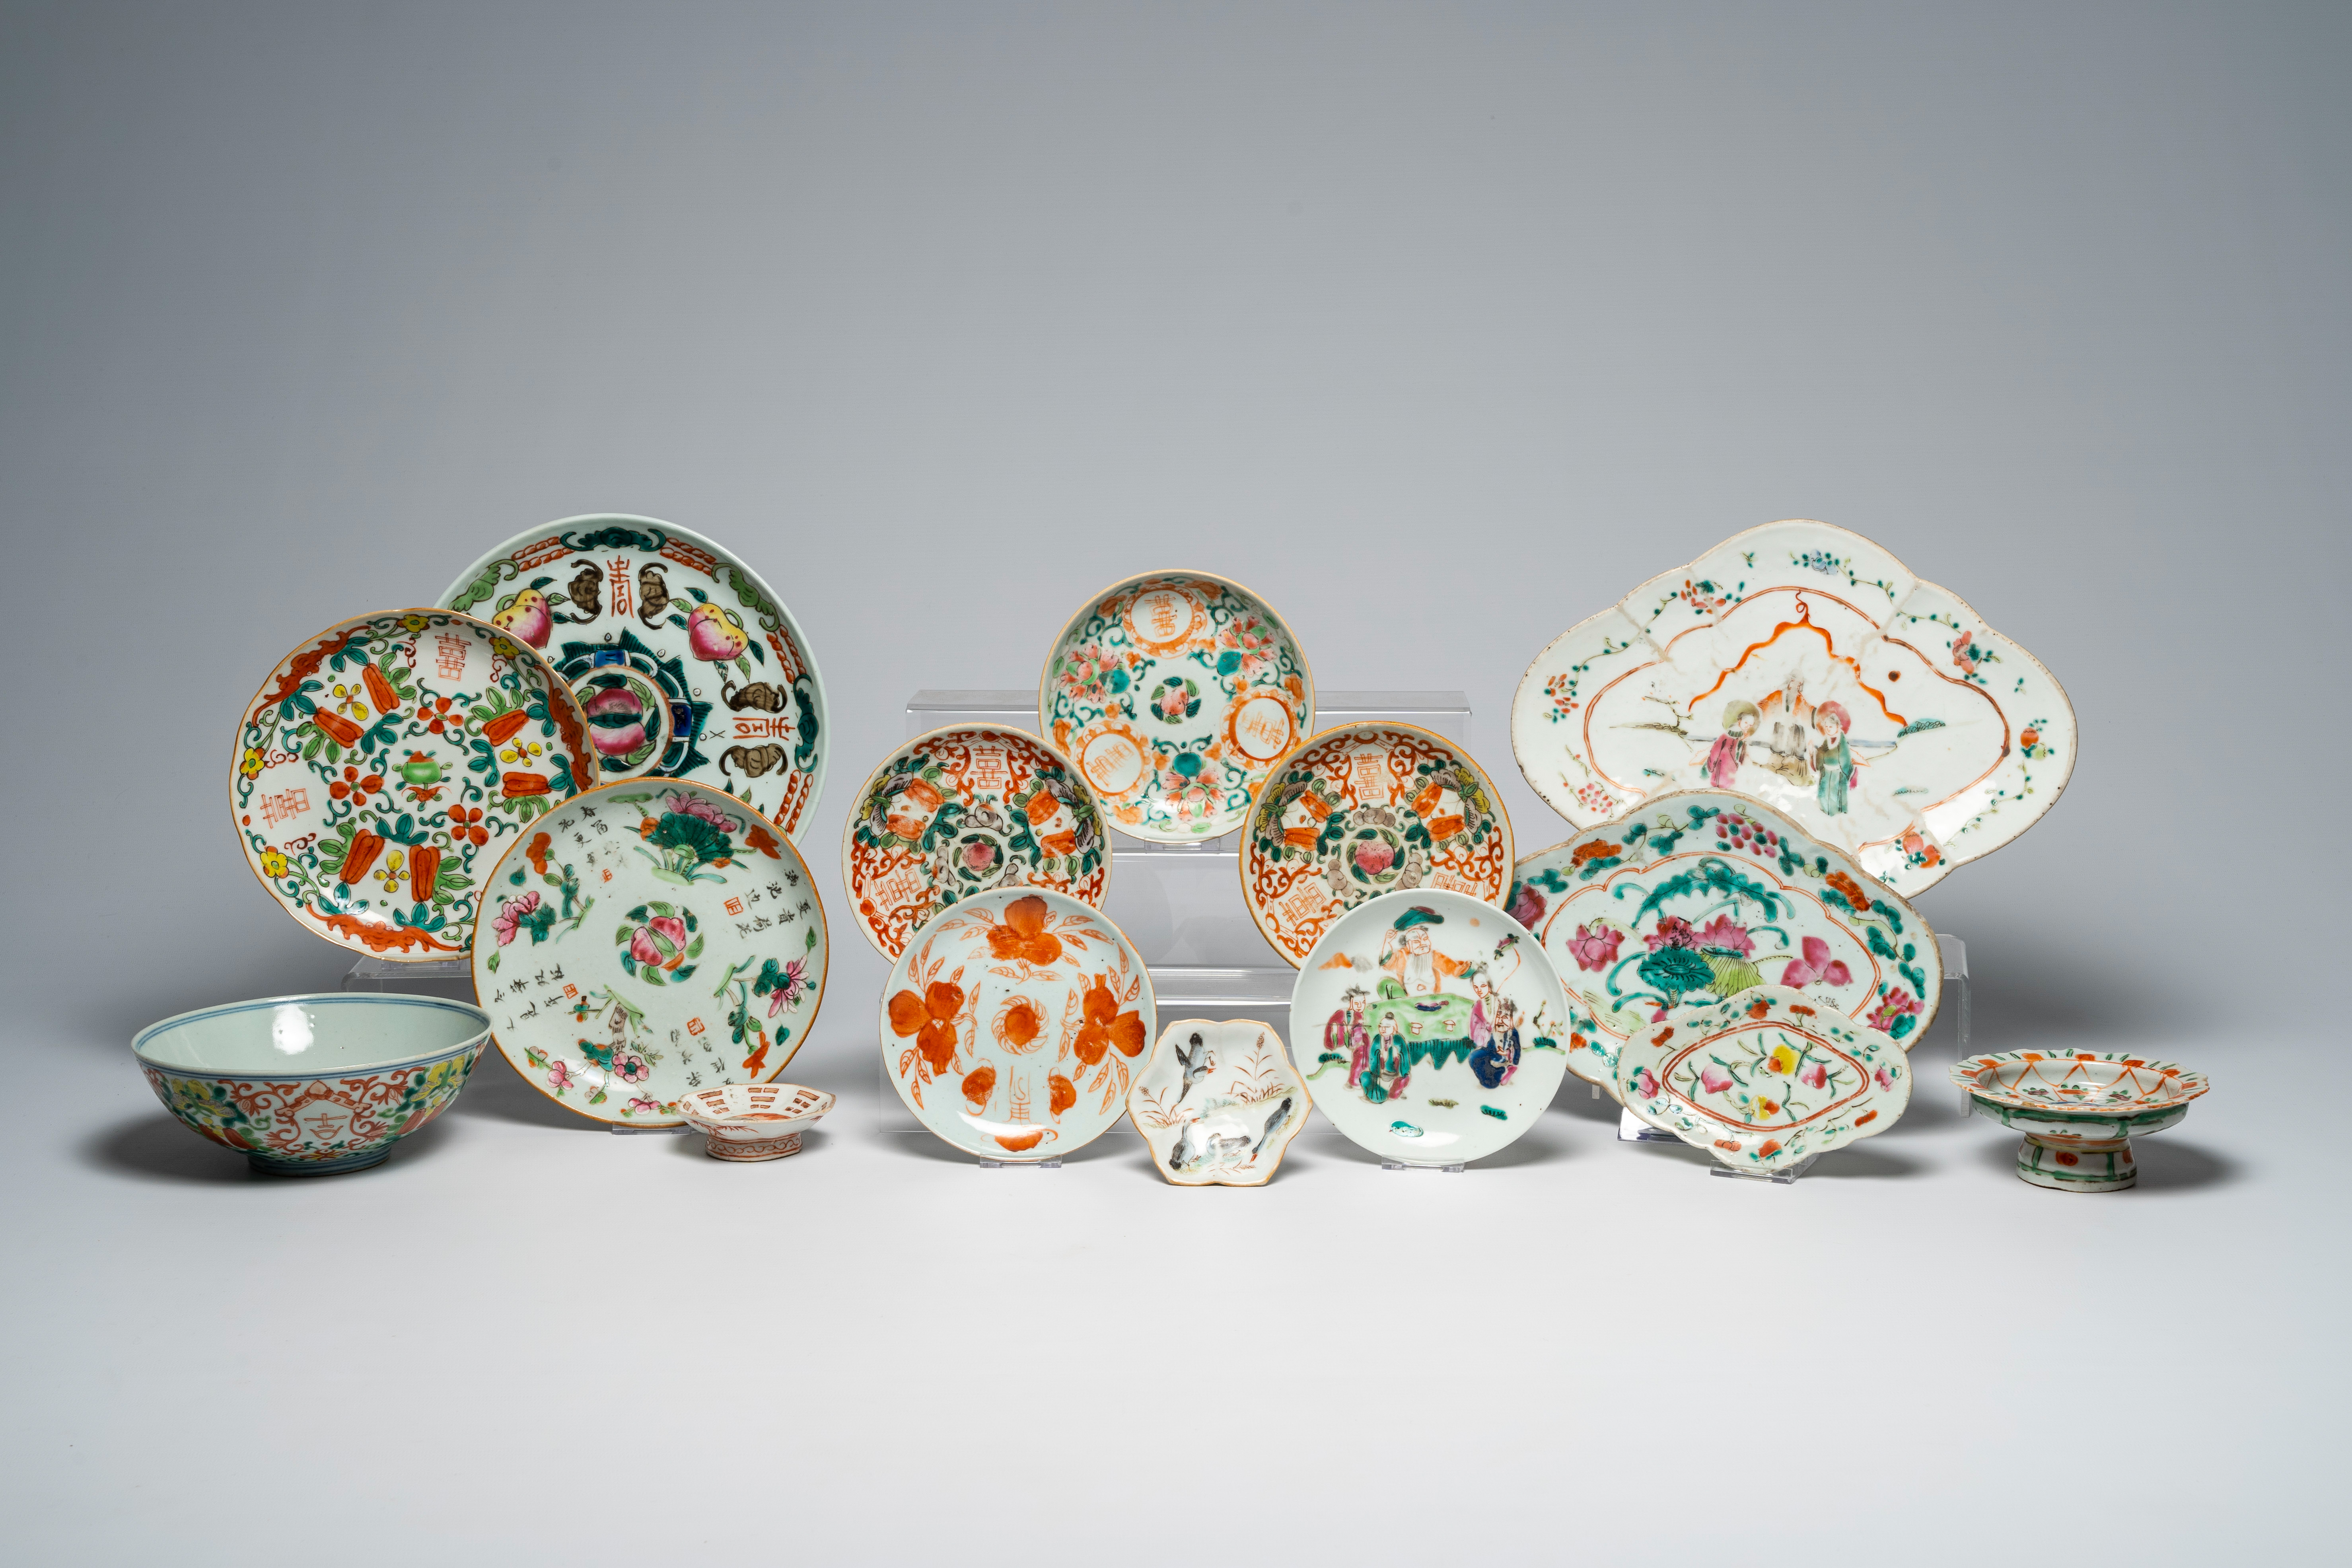 A varied collection of Chinese famille rose and polychrome porcelain, 19th/20th C.